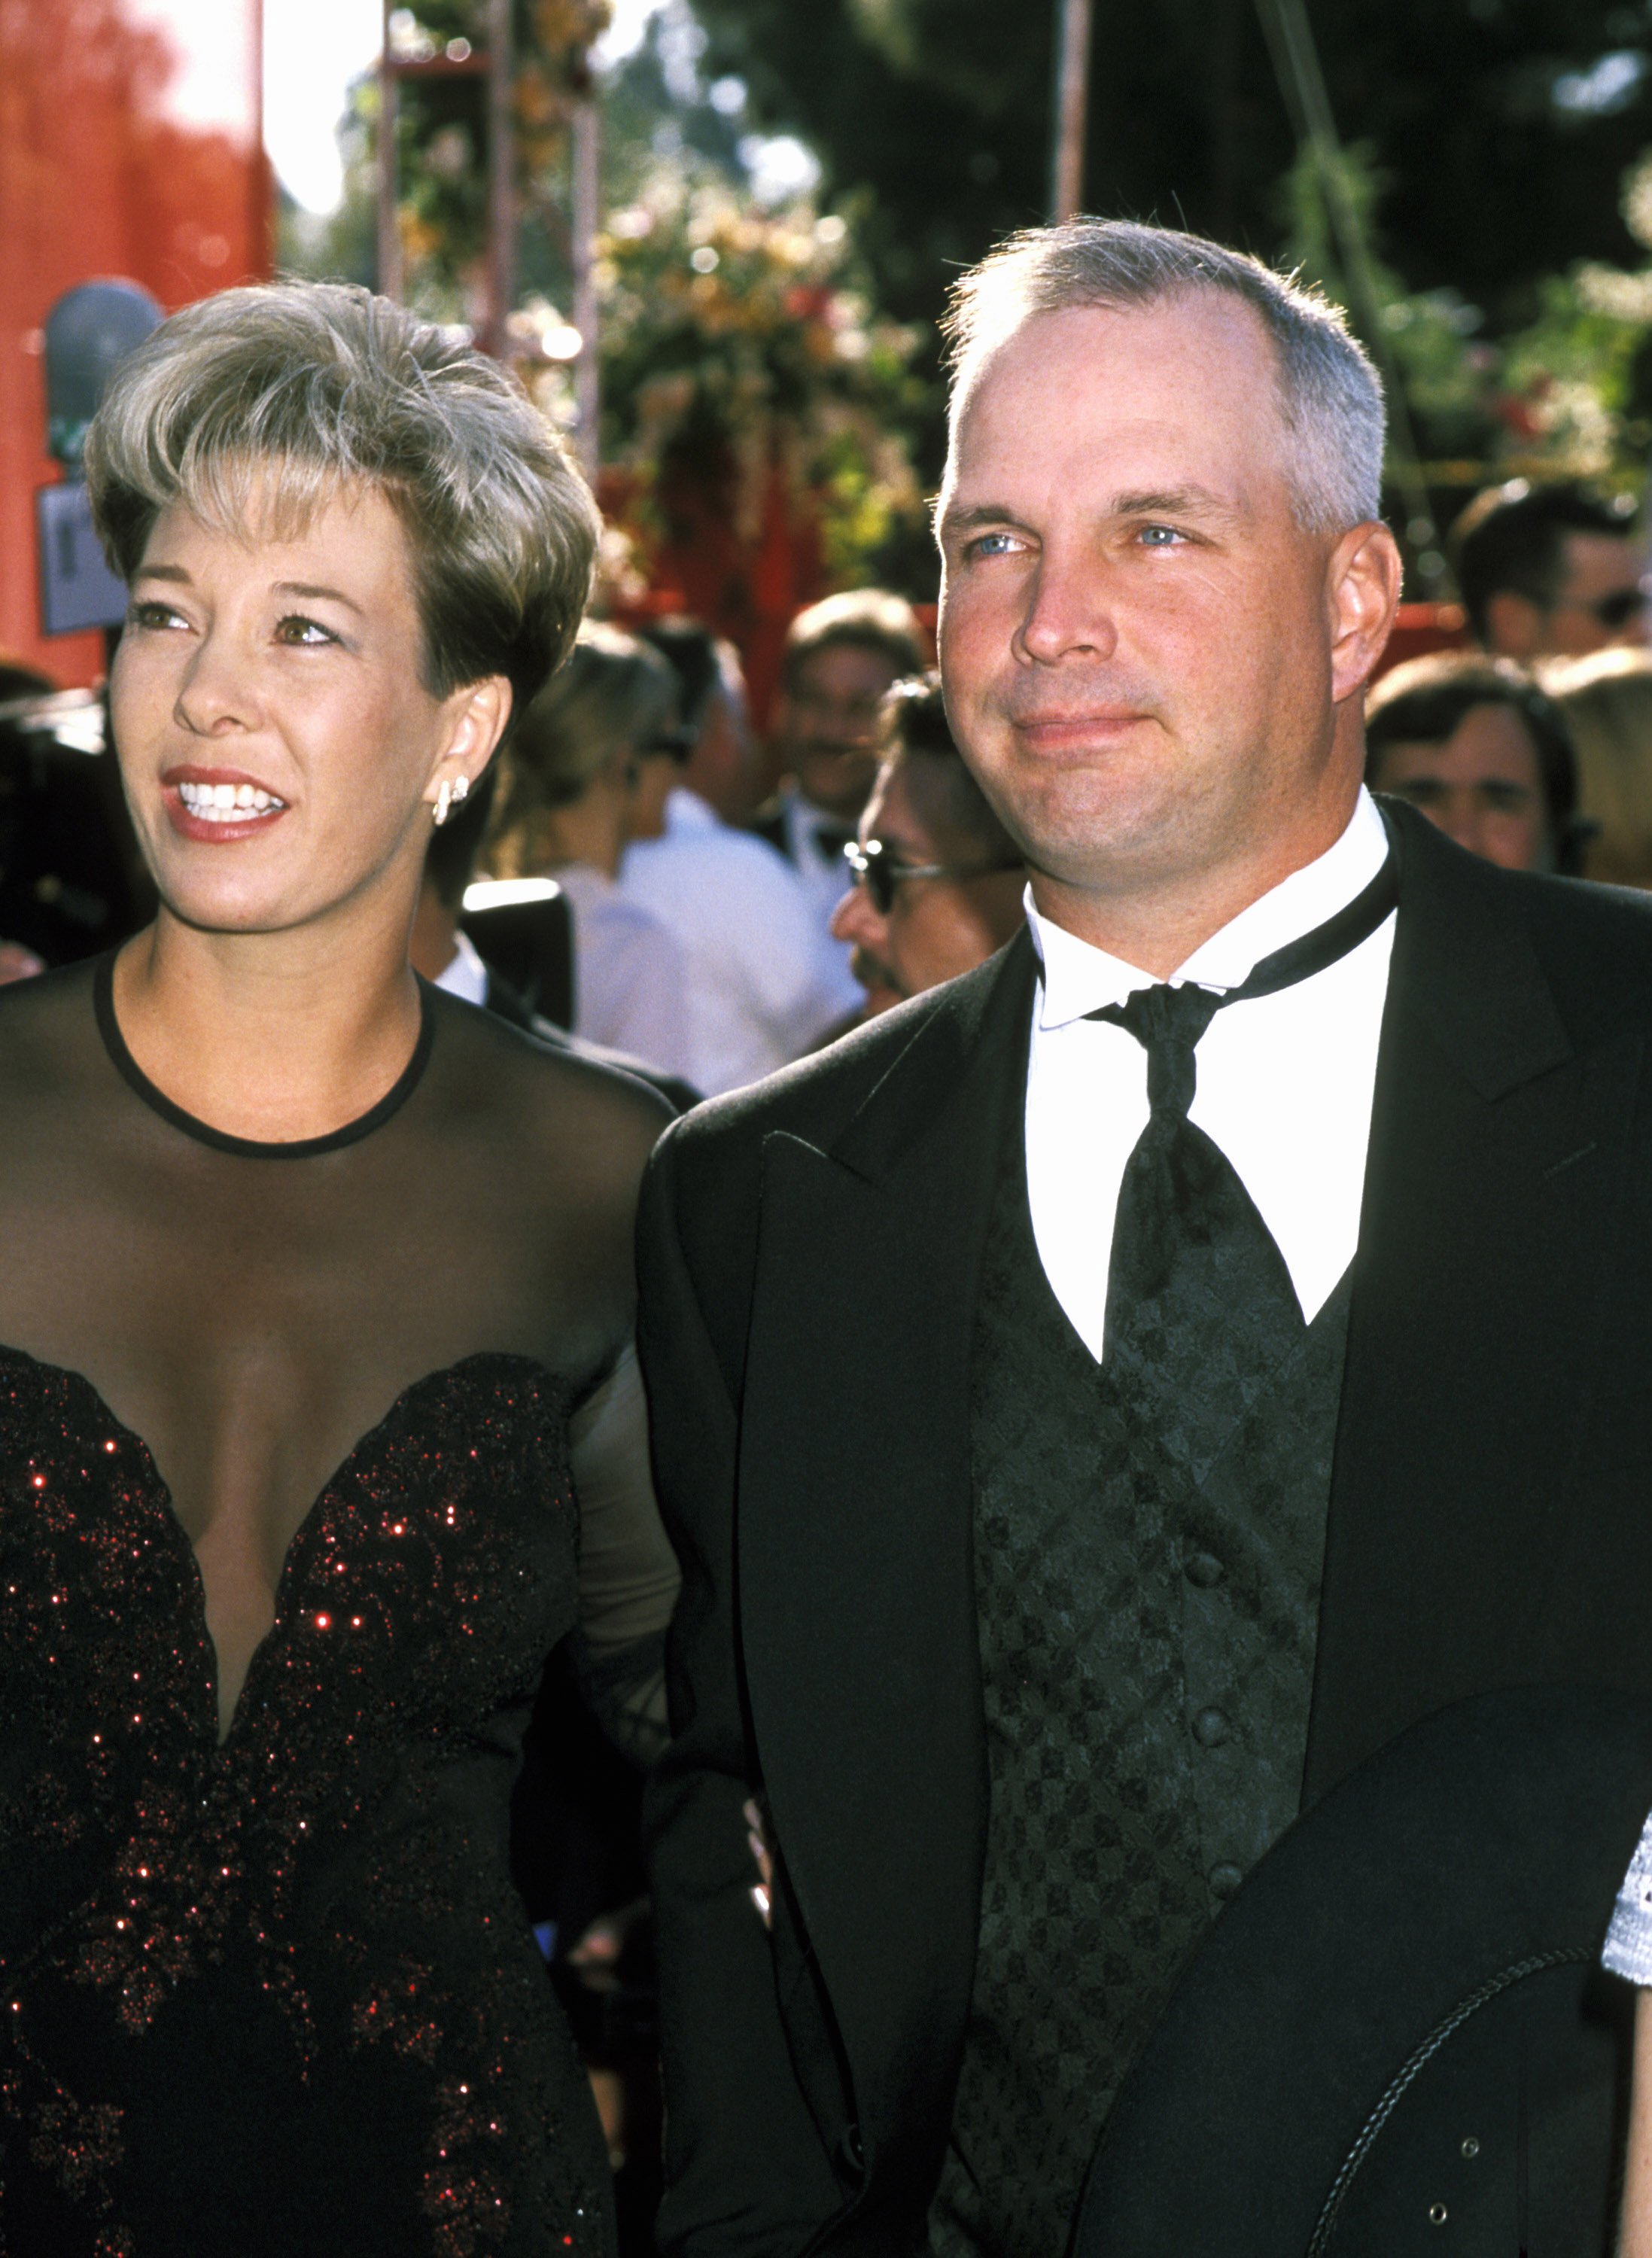 Sandy Mahl and Garth Brooks at the 72nd Annual Academy Awards in Los Angeles in 2000. | Source: Getty Images